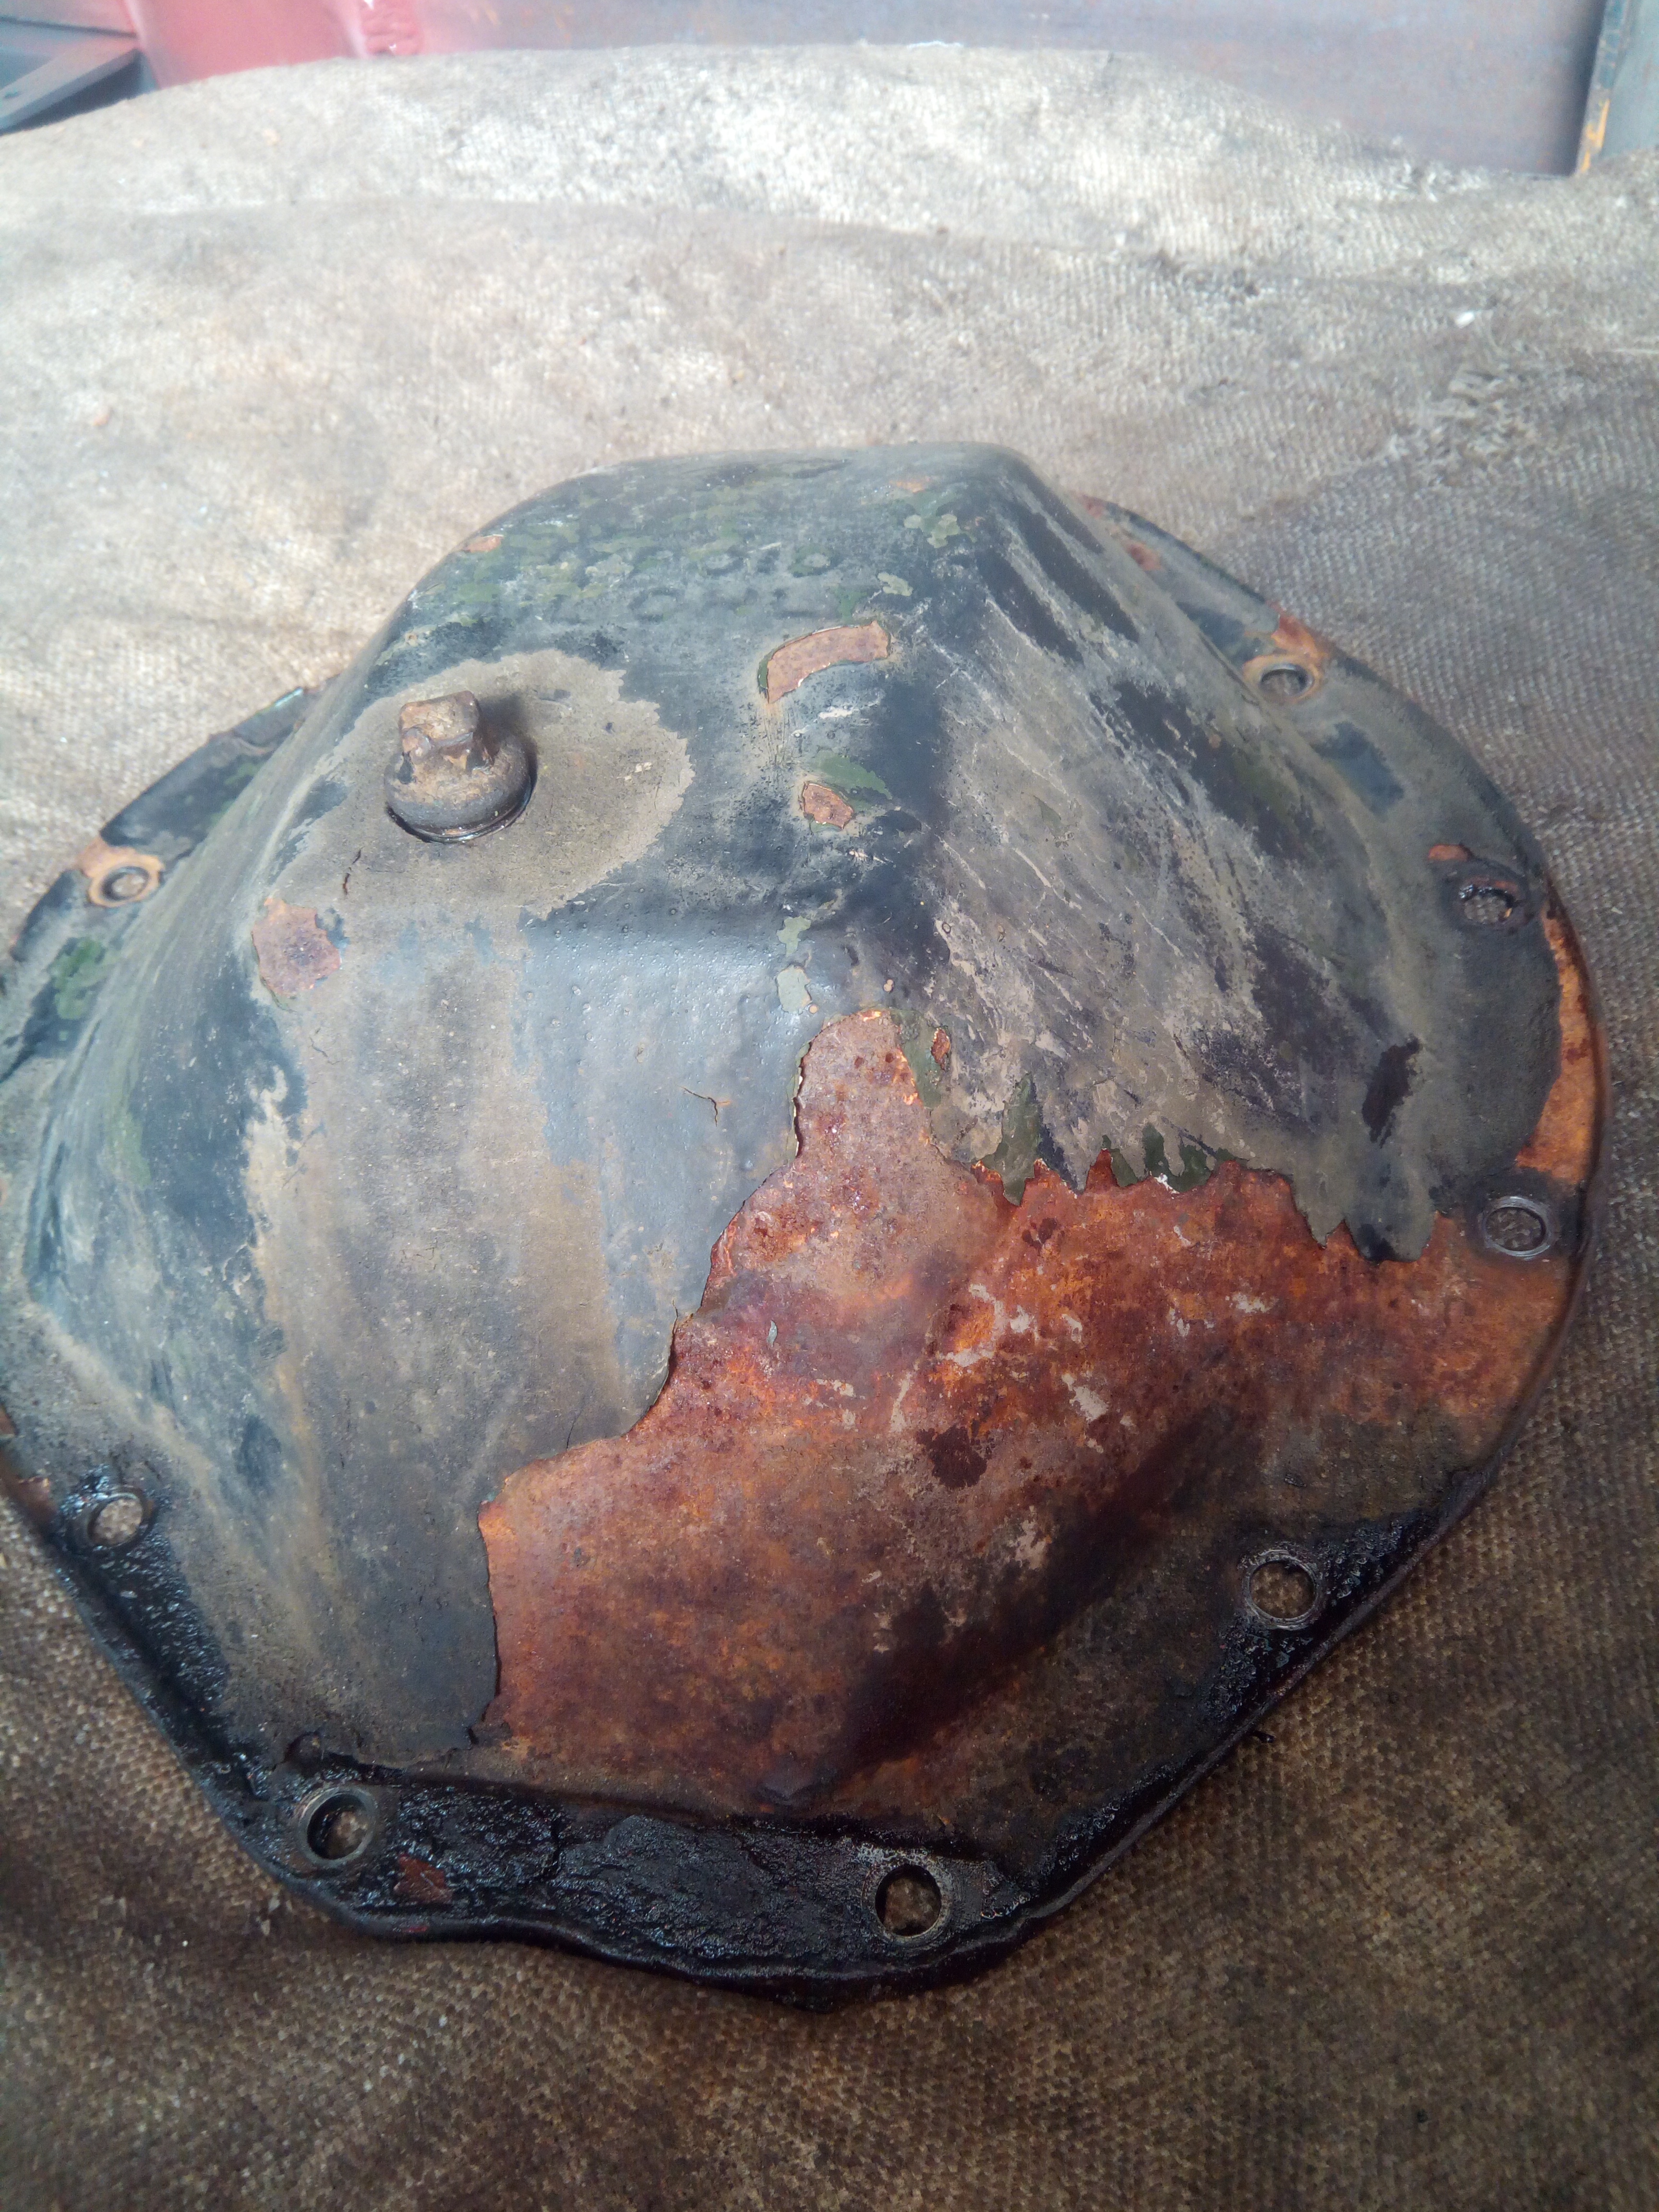 Exterior of the diff cover, showing rust, flaking paint, and
general grot.